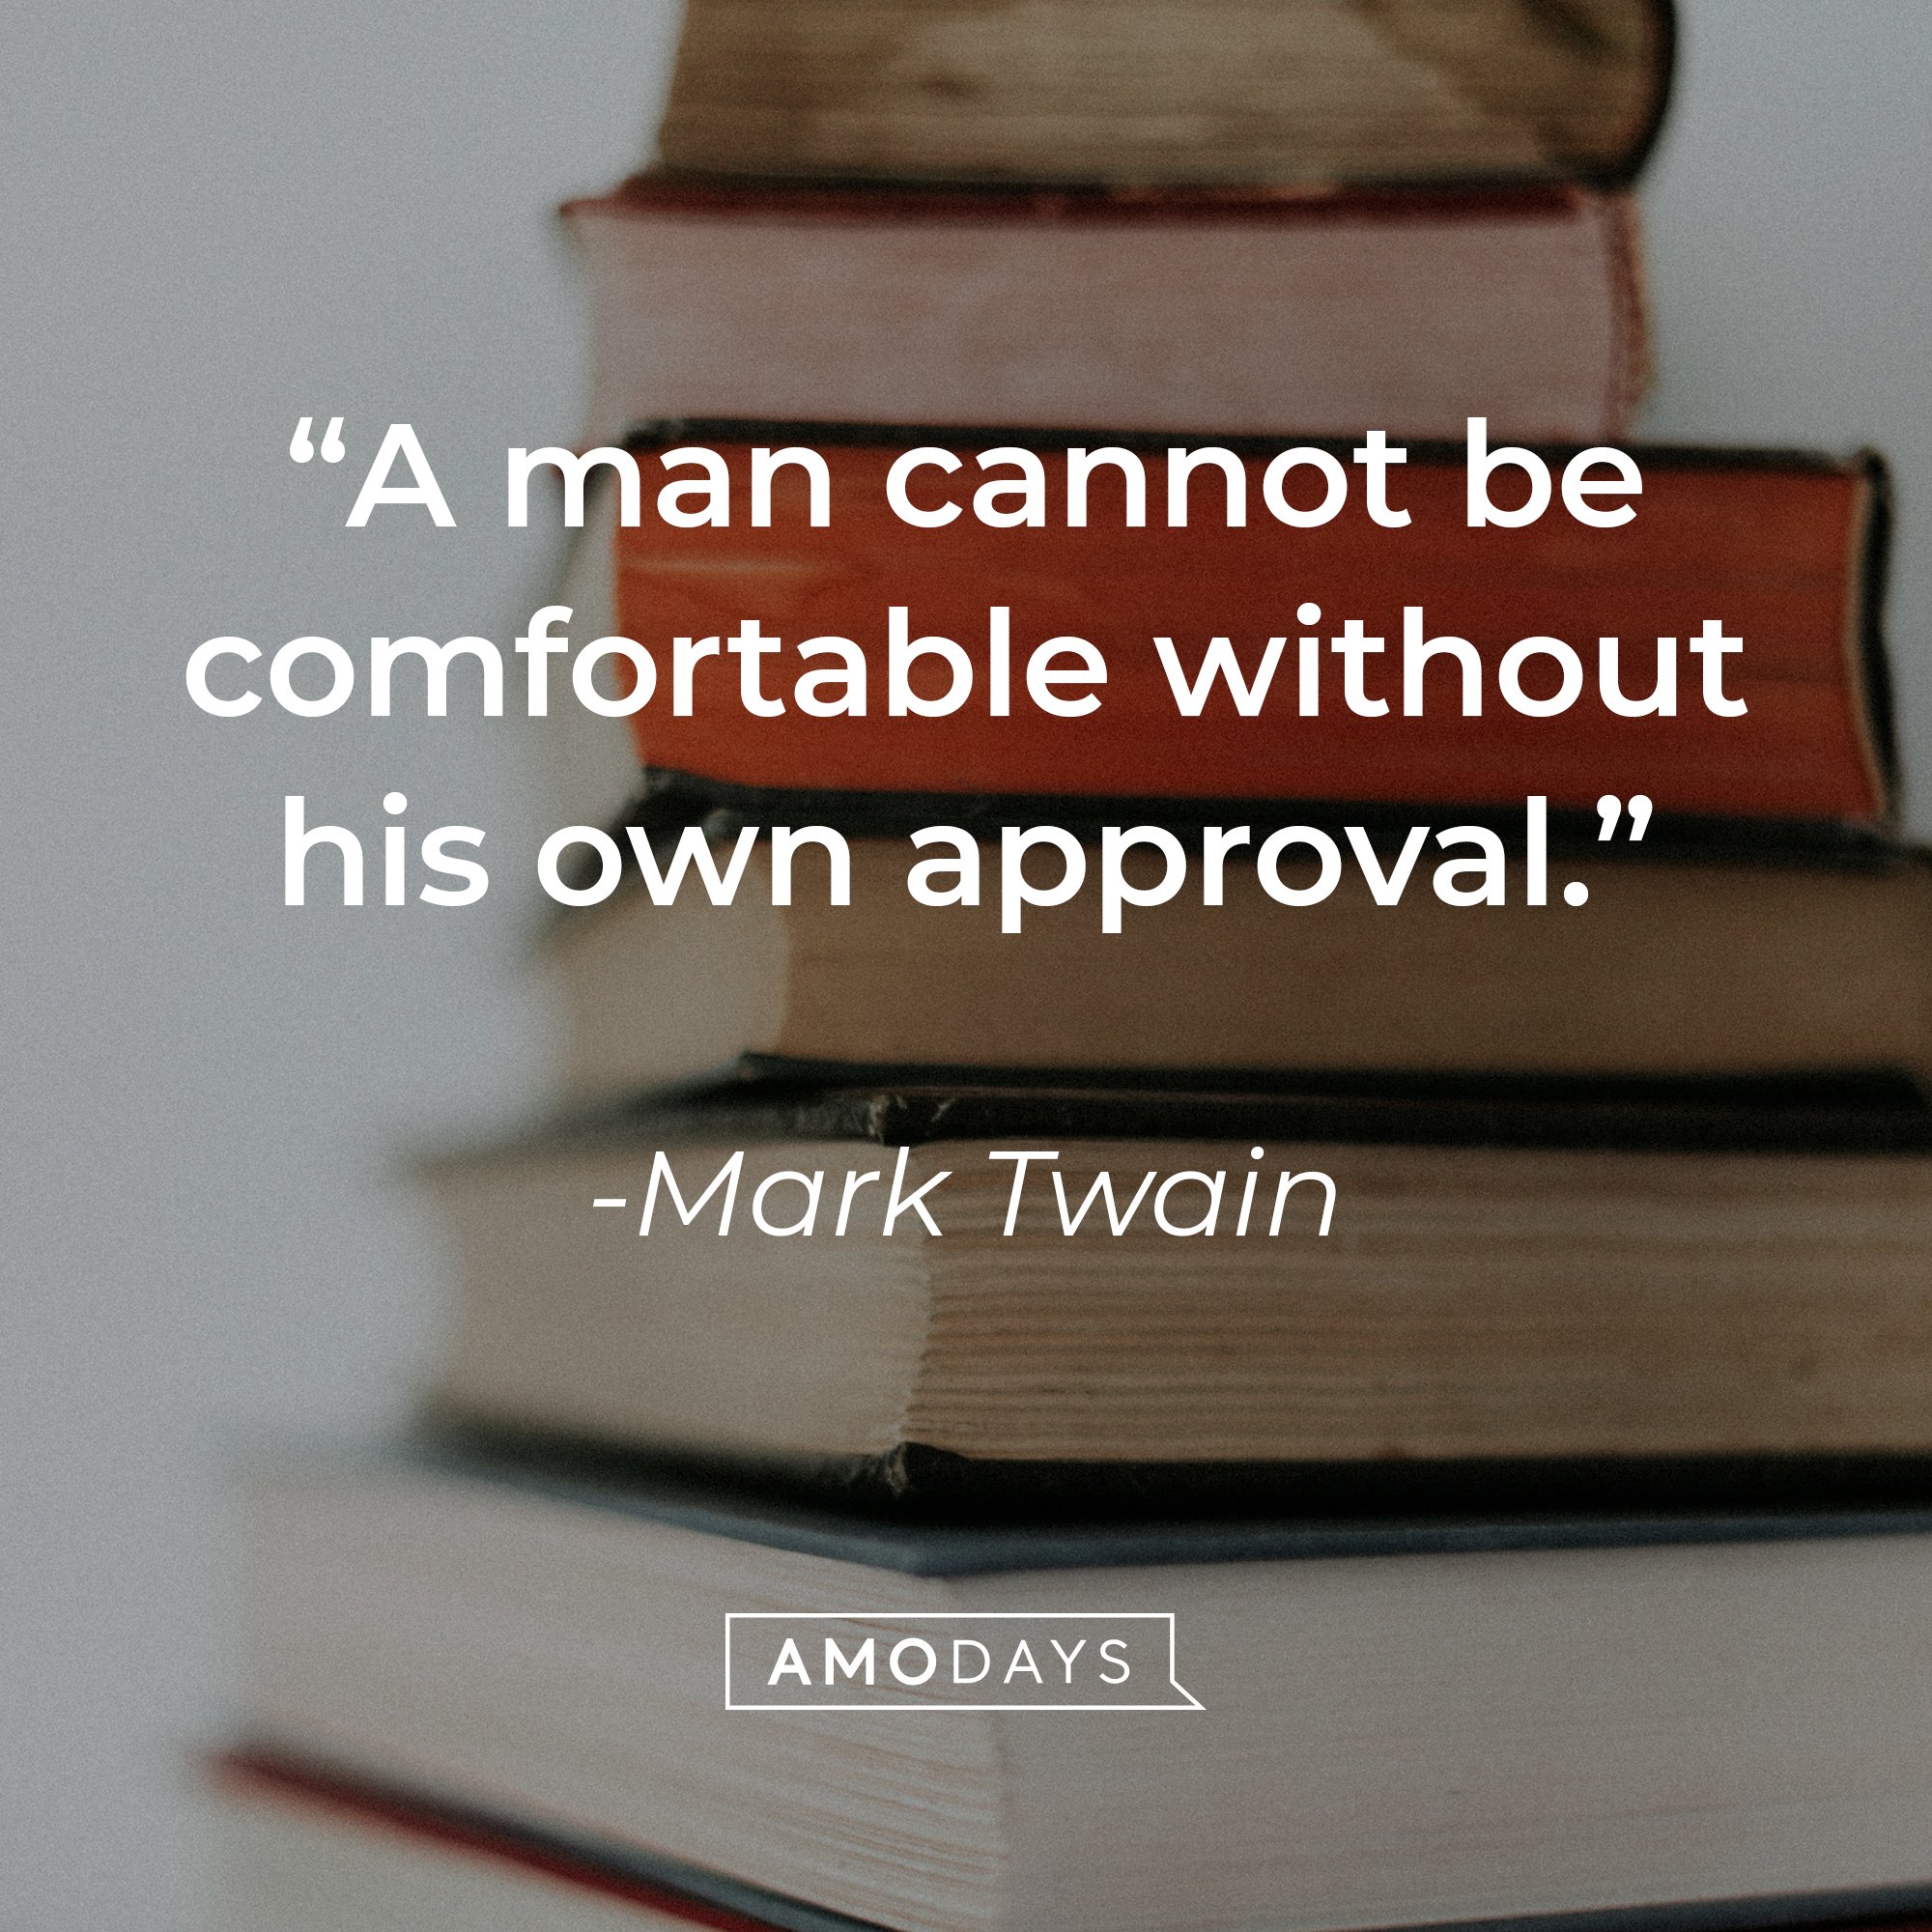 Mark Twain's quote: “A man cannot be comfortable without his own approval.” | Image: AmoDays